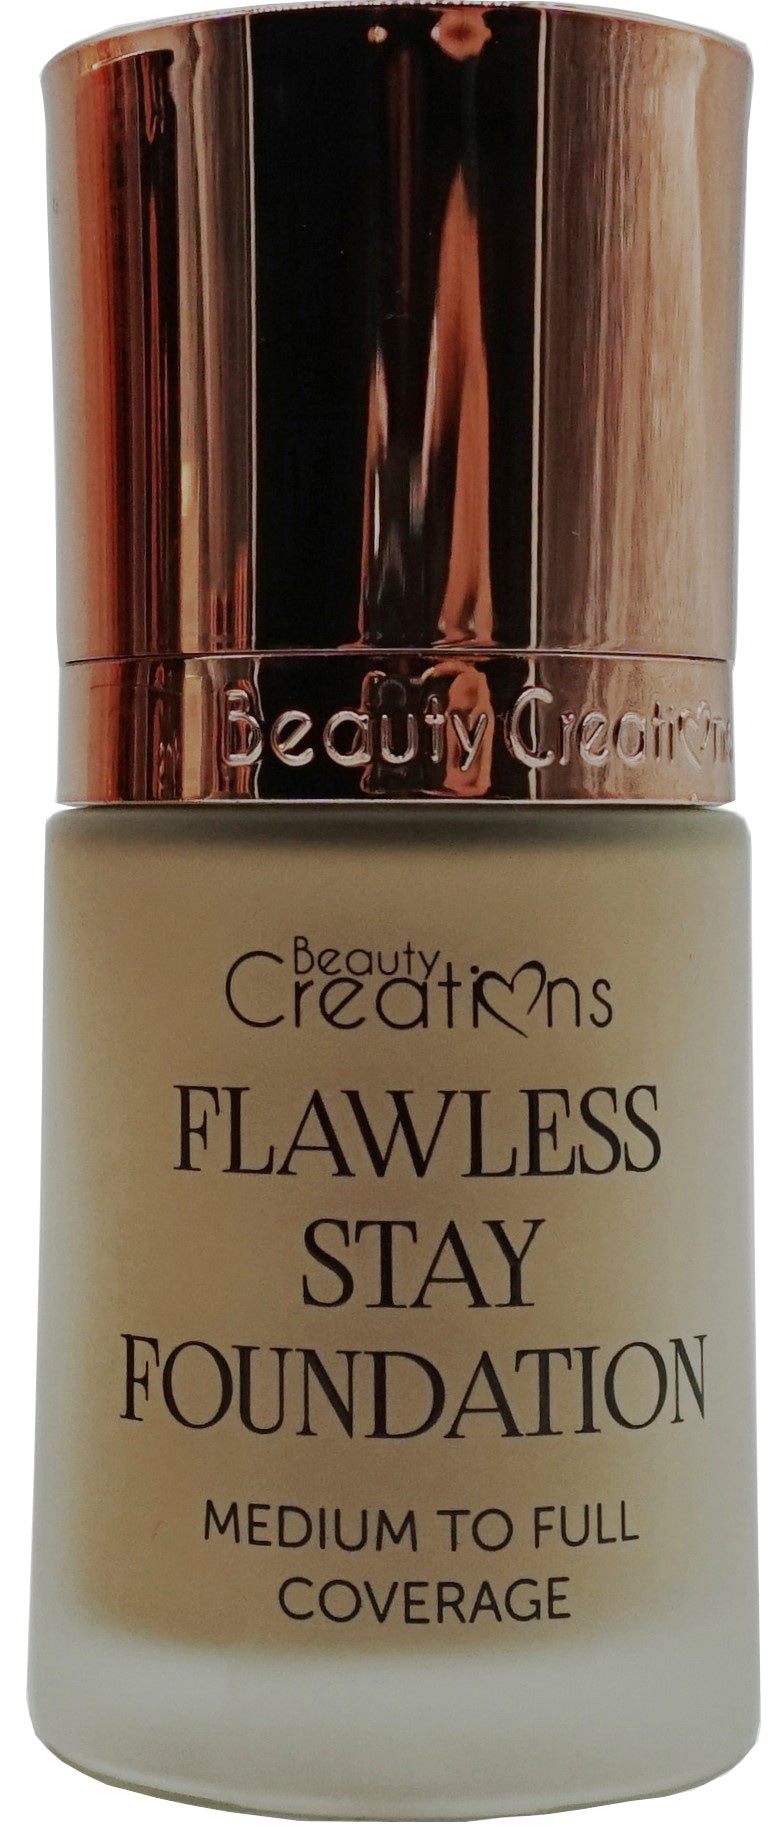 Flawless Stay Foundation by Beauty Creations